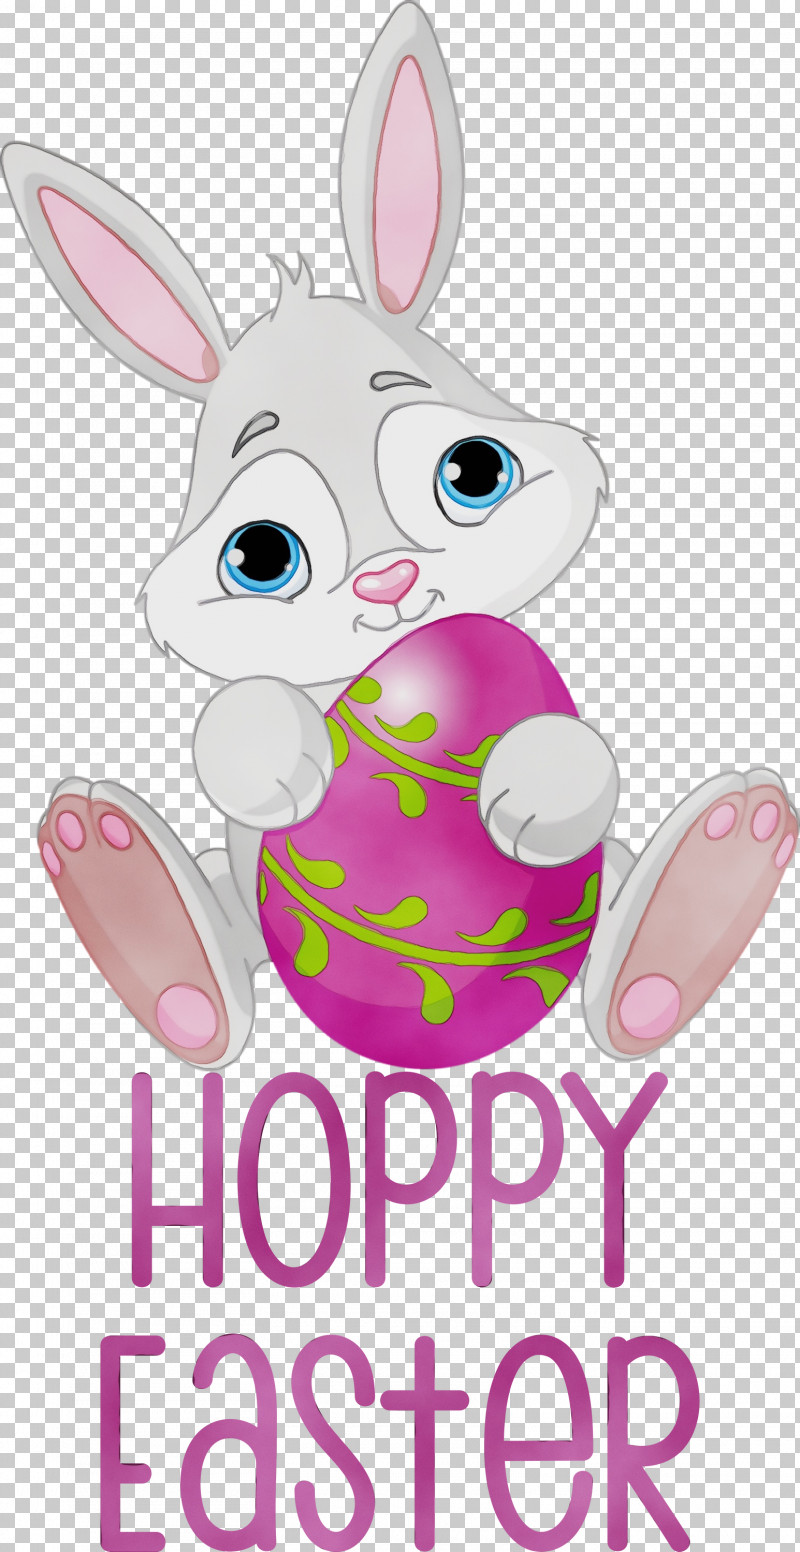 Rabbit Hare Cartoon Animation PNG, Clipart, Animation, Cartoon, Easter Day, Happy Easter, Hare Free PNG Download